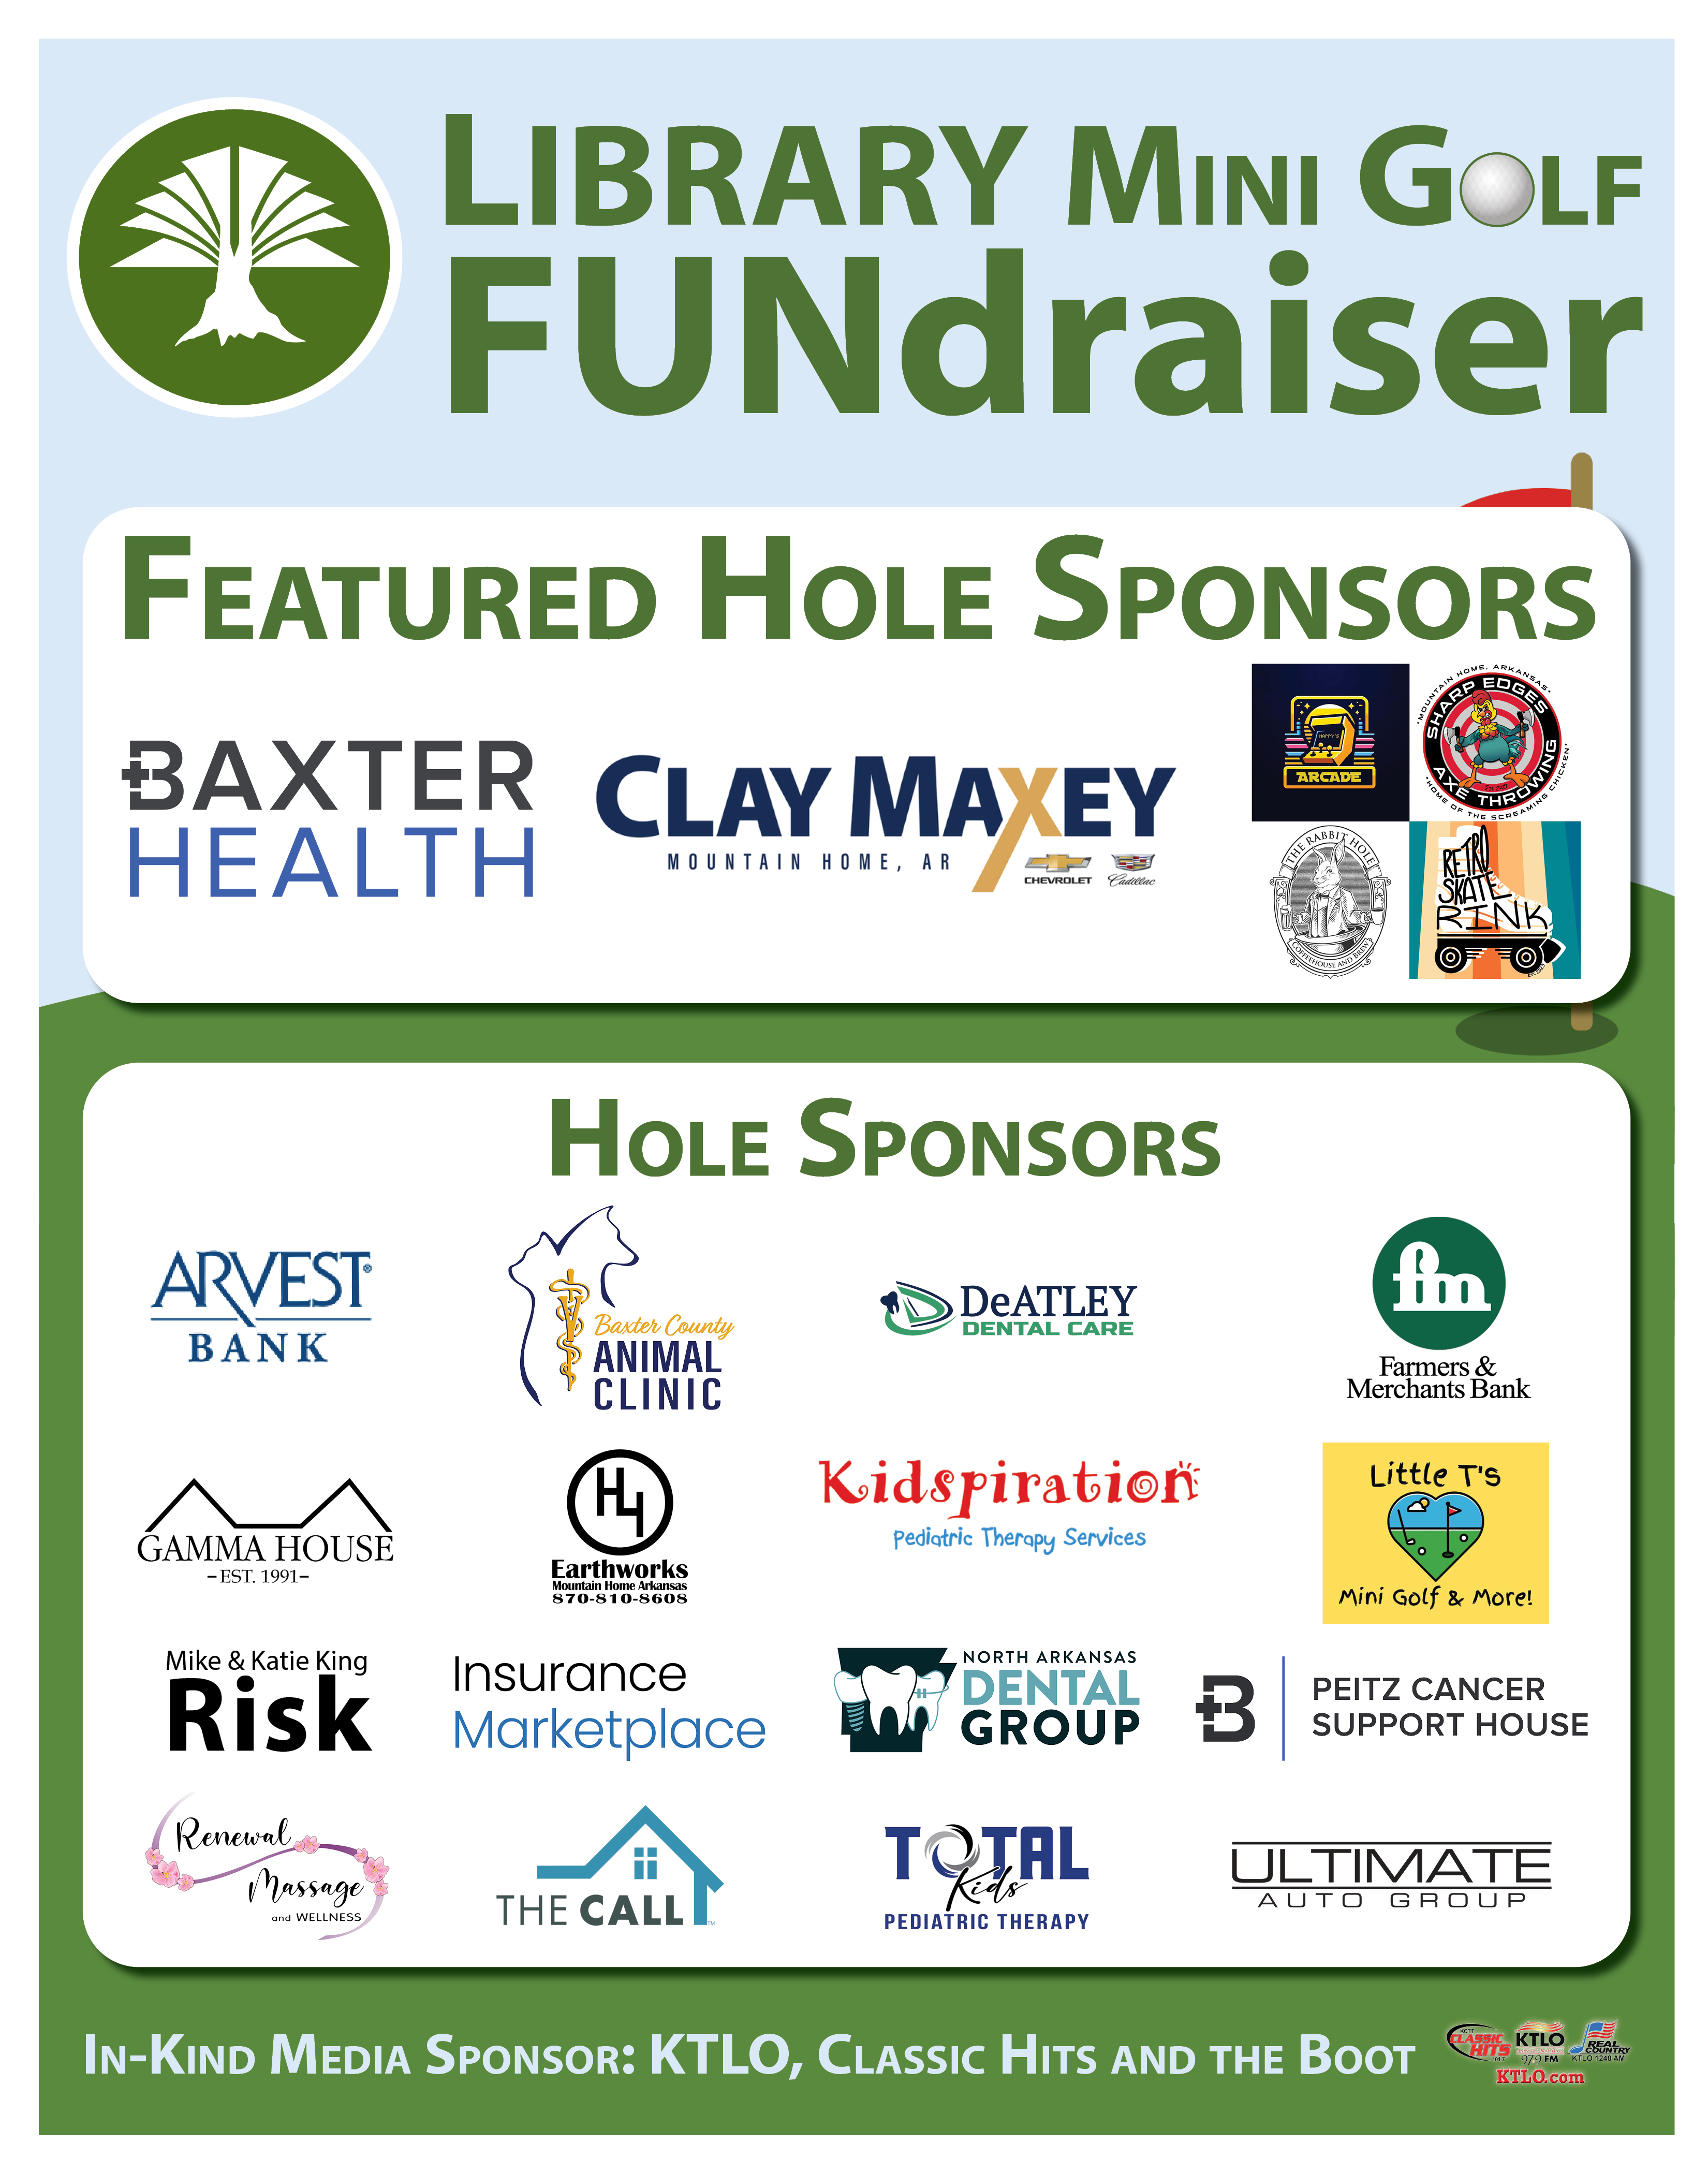 Library Mini Golf Fundraiser Hole Sponsors and their logos.